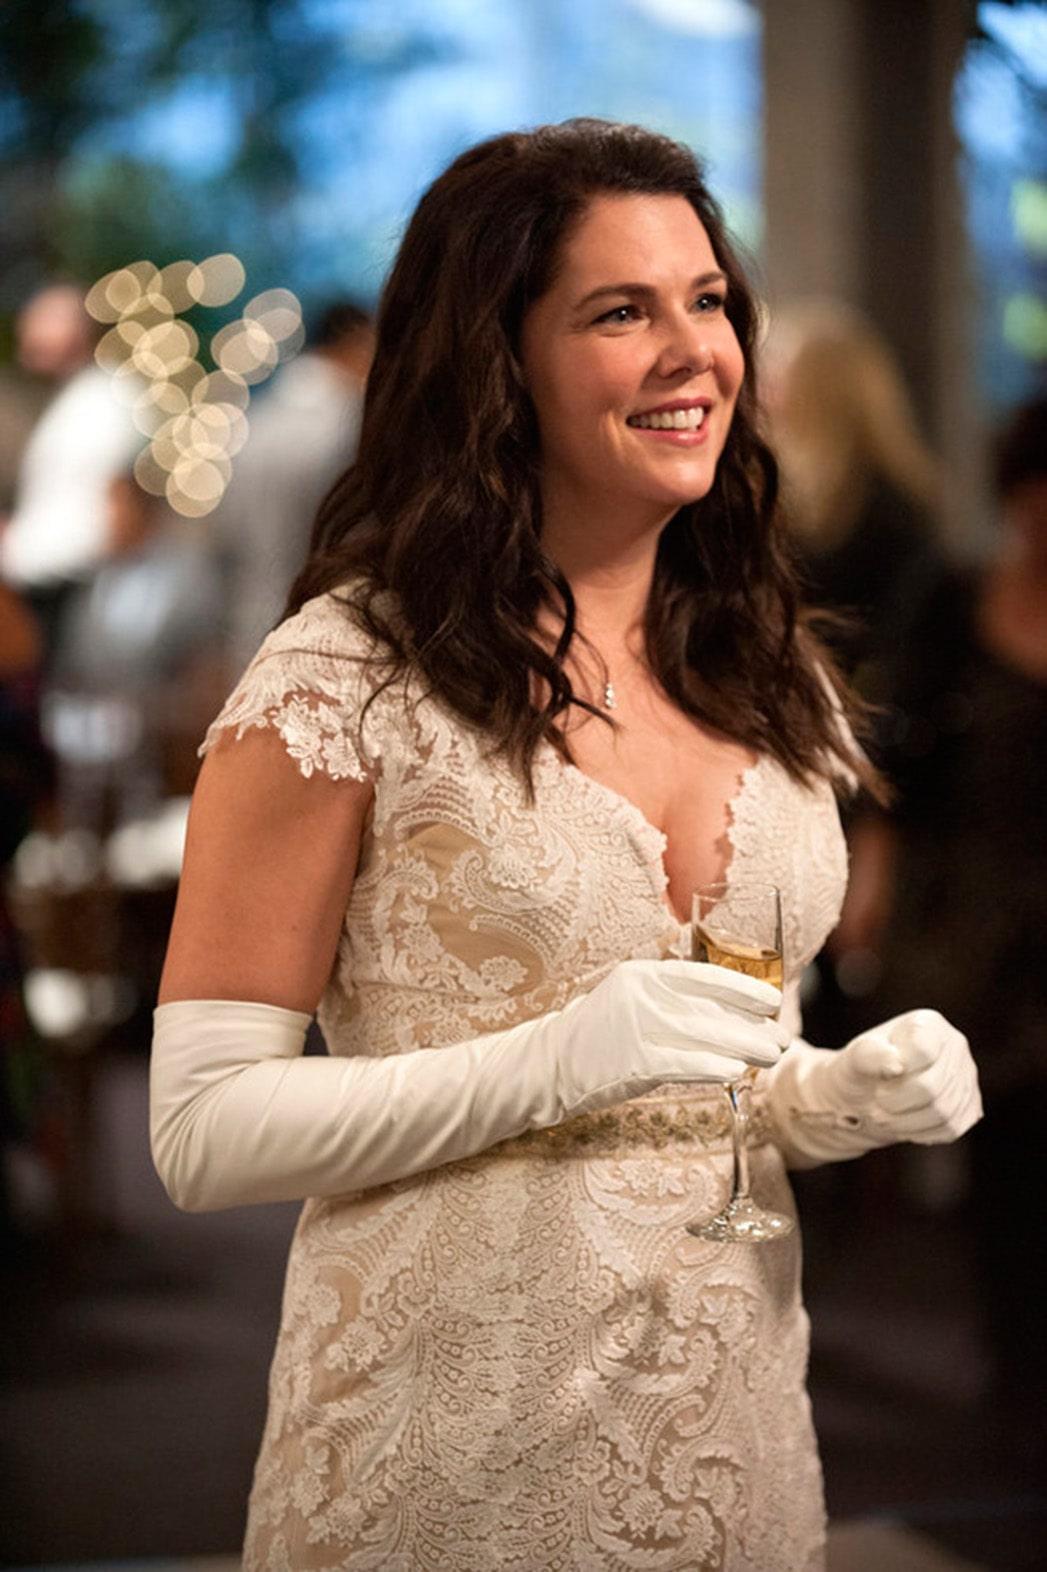 49 Hottest Lauren Helen Graham Bikini Pictures Will Motivate You To Be Classy Gentleman For Her | Best Of Comic Books